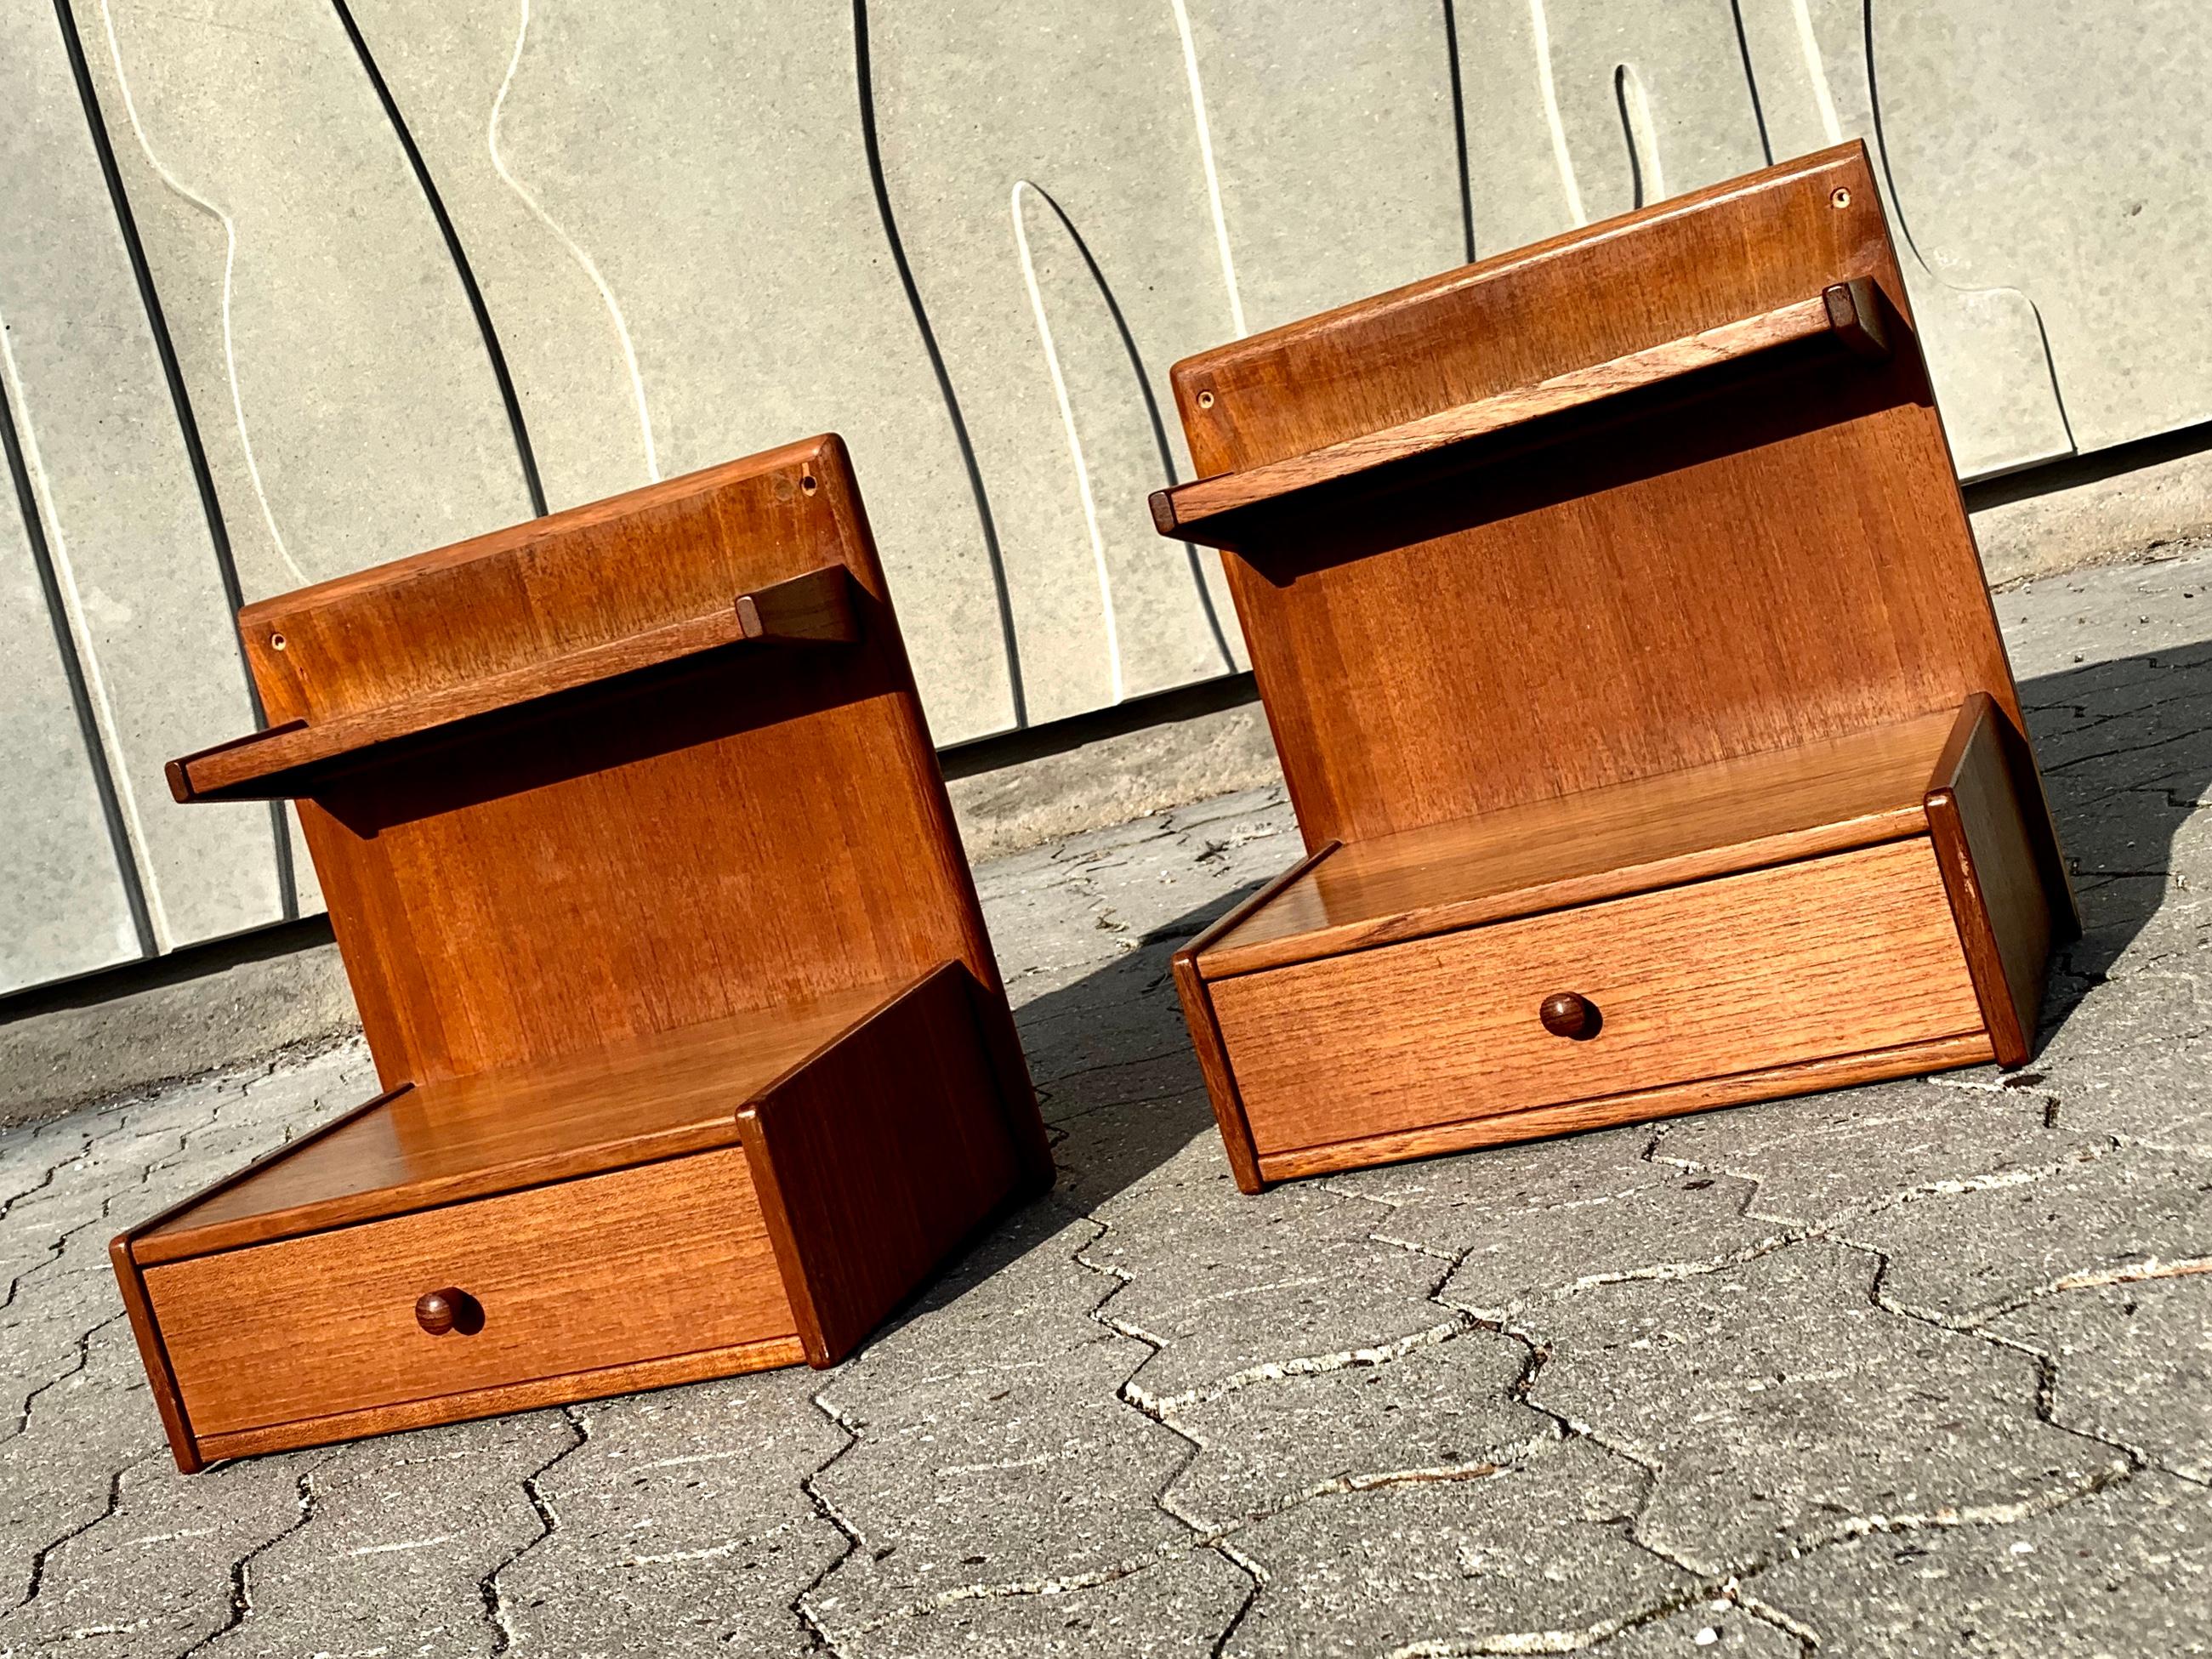 - Beautiful and rare set of hanging nightstands
- Featuring a small black Formica shelf and a drawer
- Designed and produced in Denmark in the 1960s.